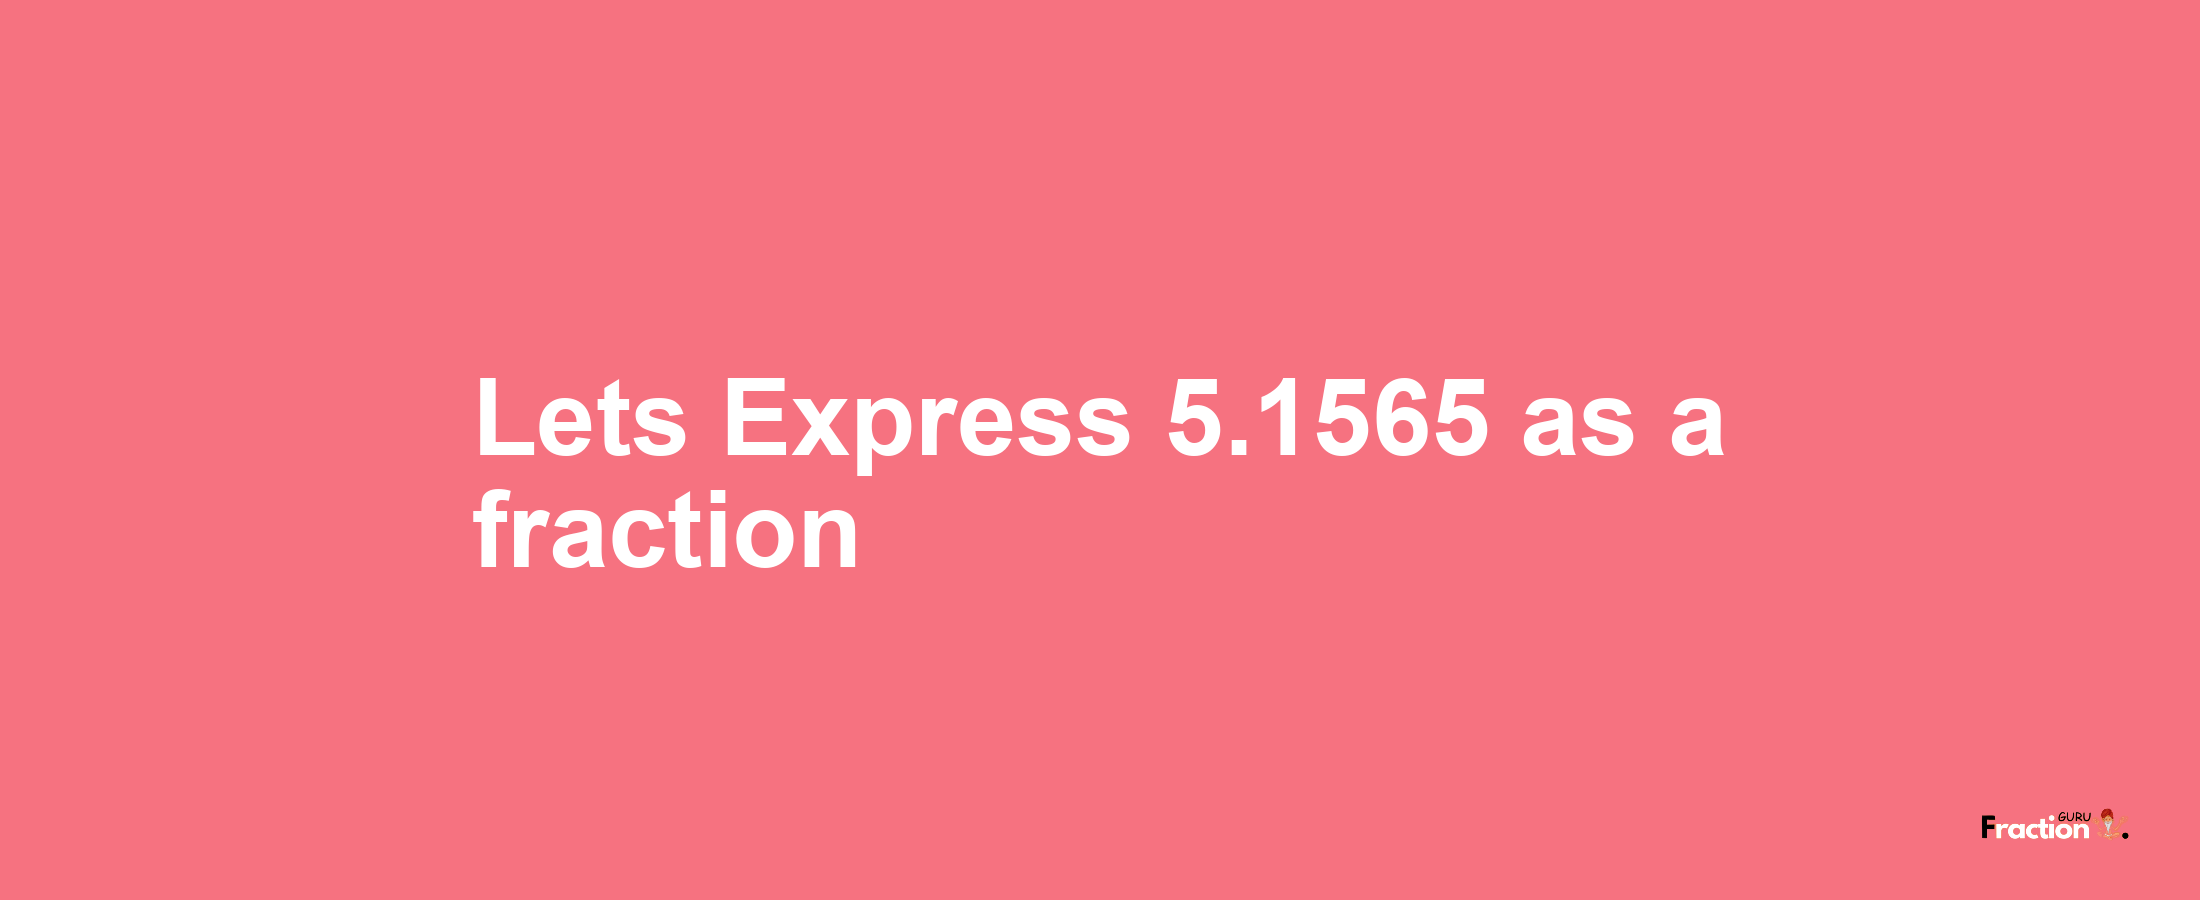 Lets Express 5.1565 as afraction